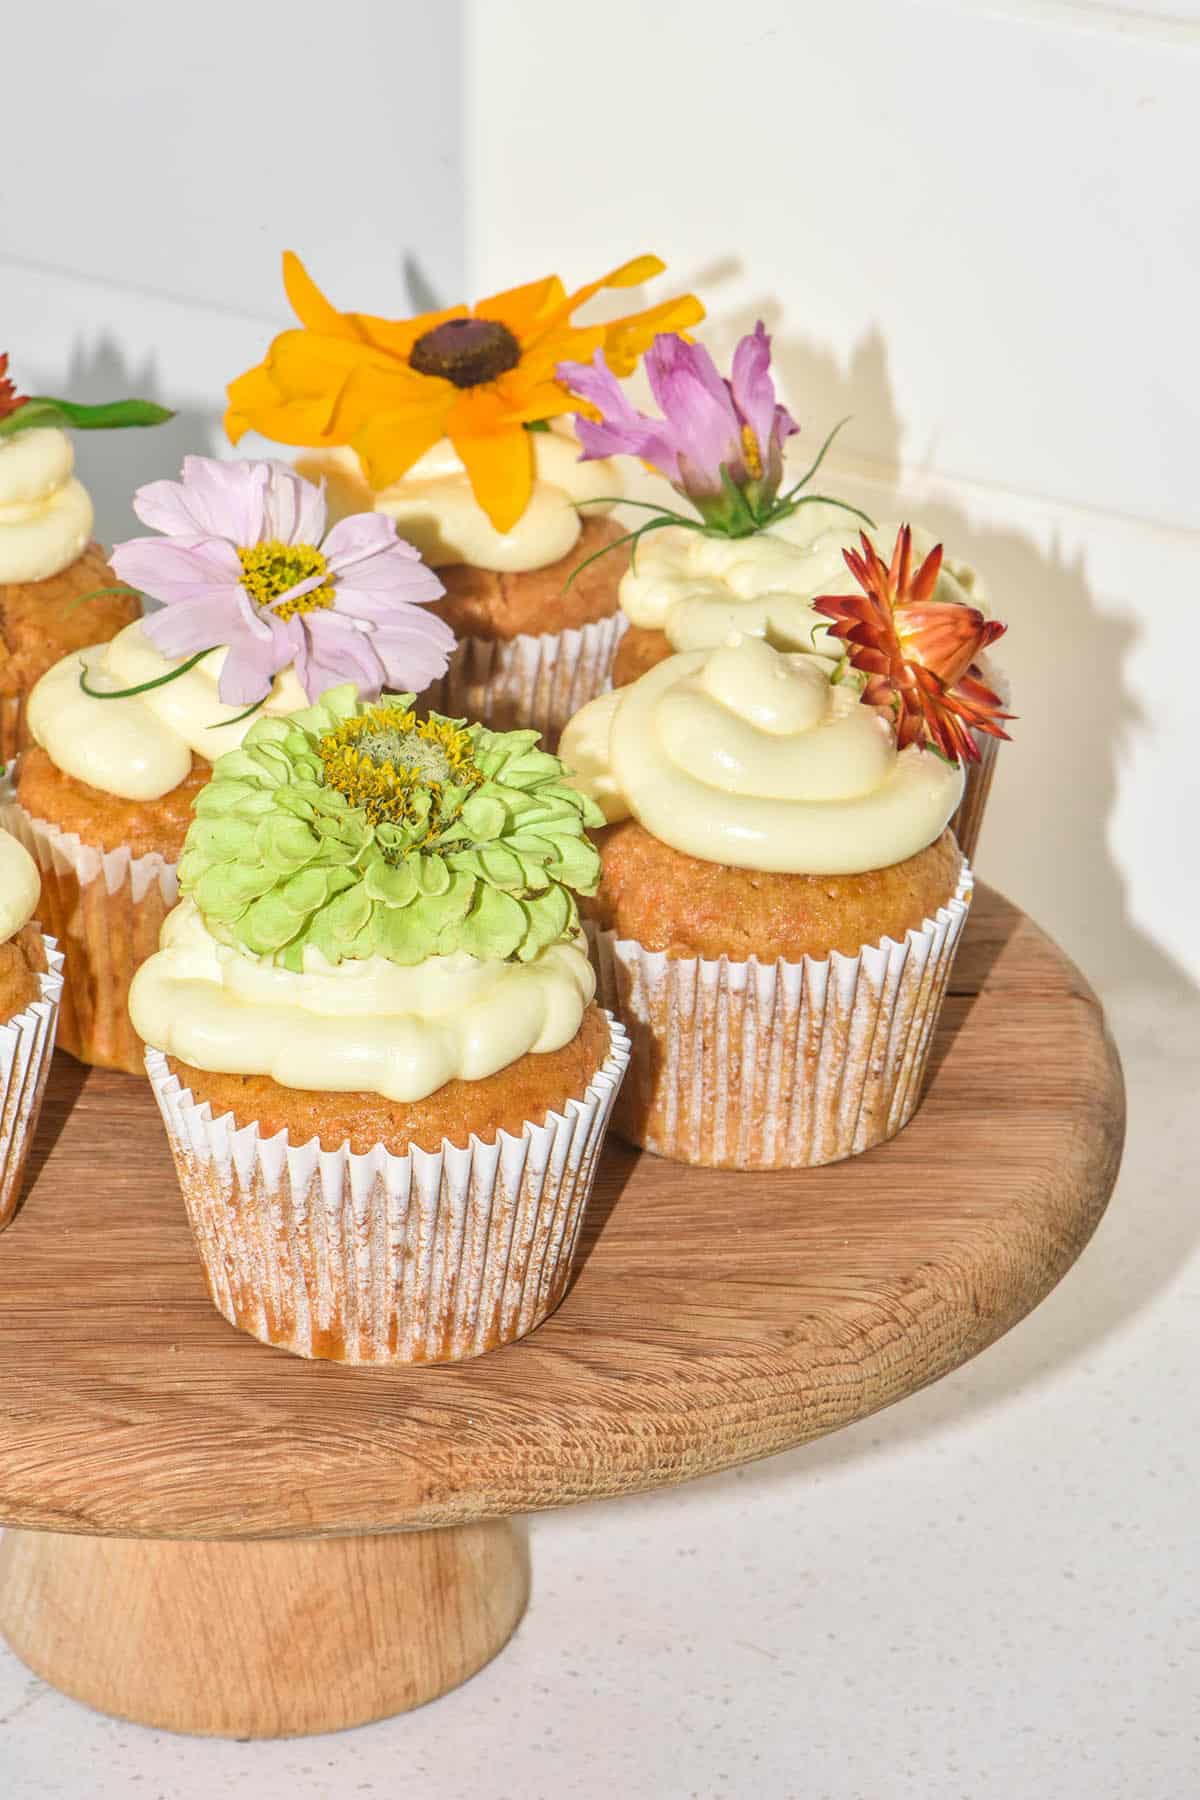 A brightly lit side on flash image of gluten free carrot cupcakes on a wooden cake stand against a white stone kitchen backdrop. The muffins are topped with piped cream cheese and a different coloured spring flower for each cupcake.